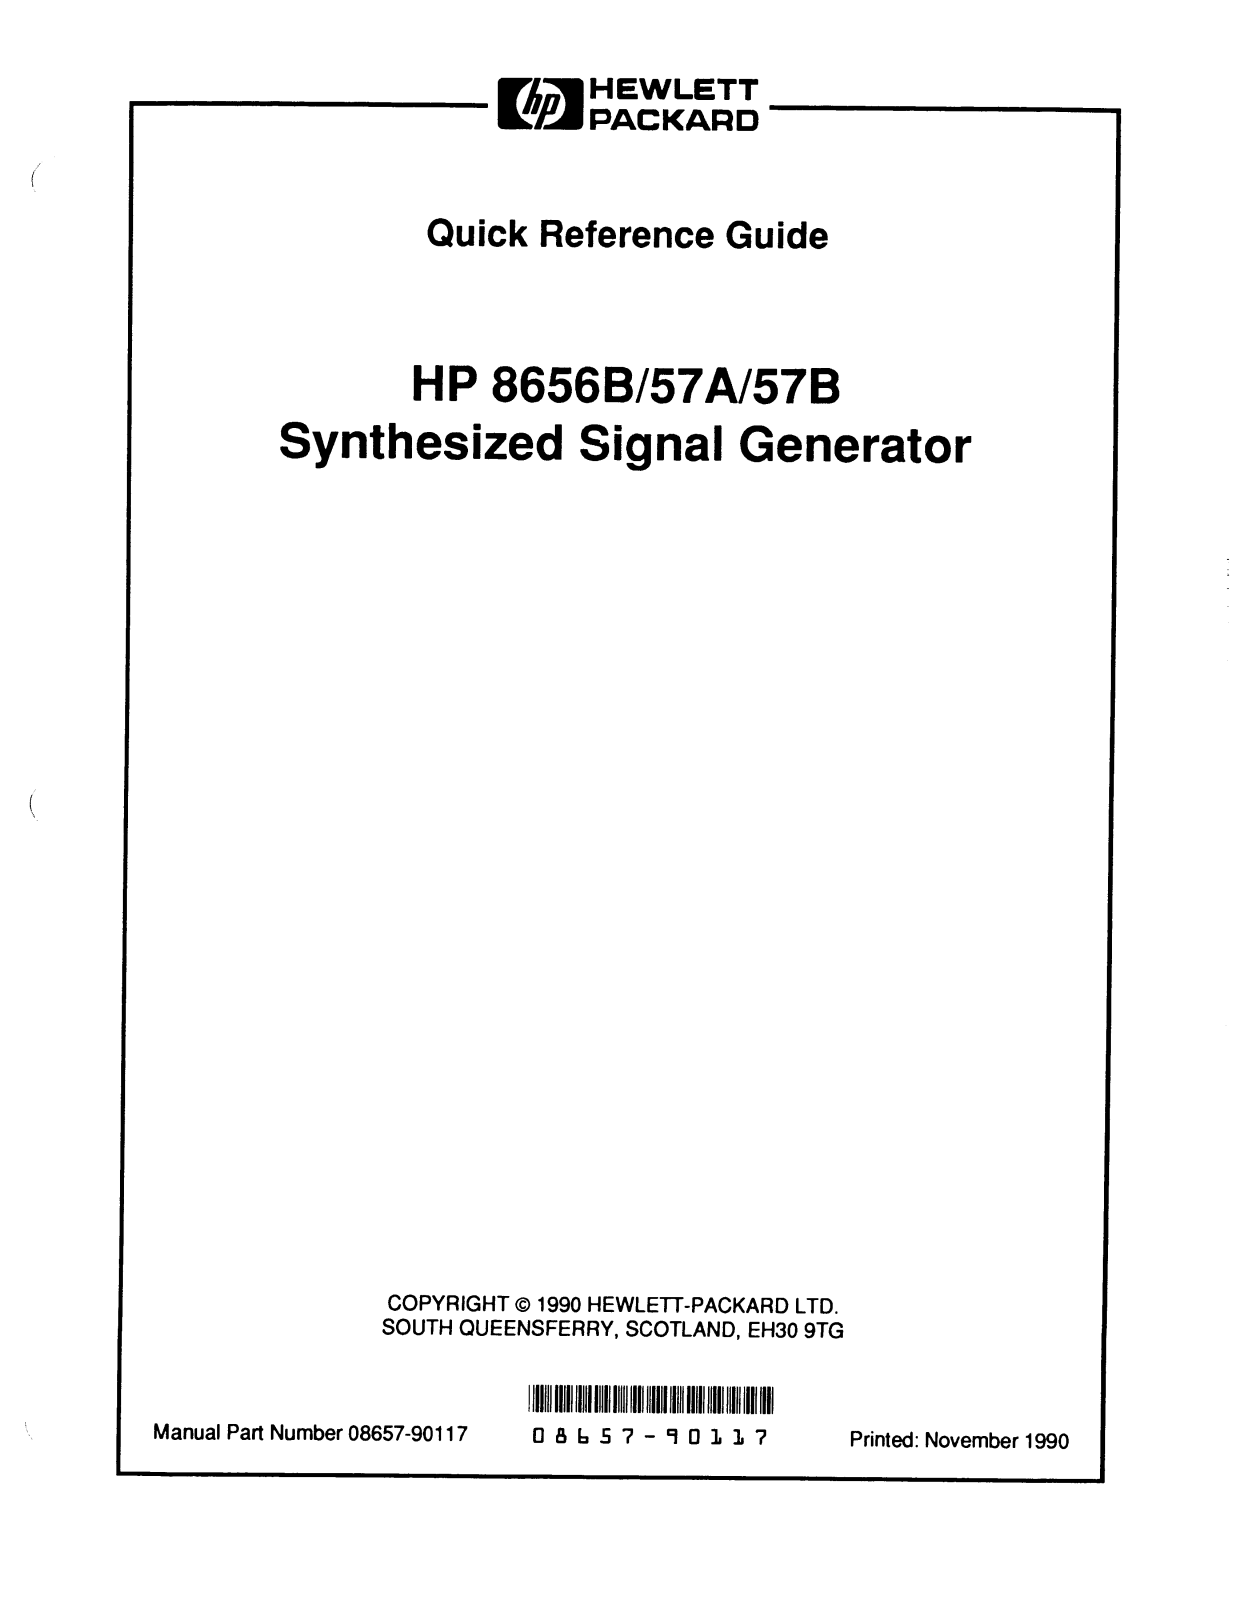 HP 8656b, 8657a, 8657b quick reference guide